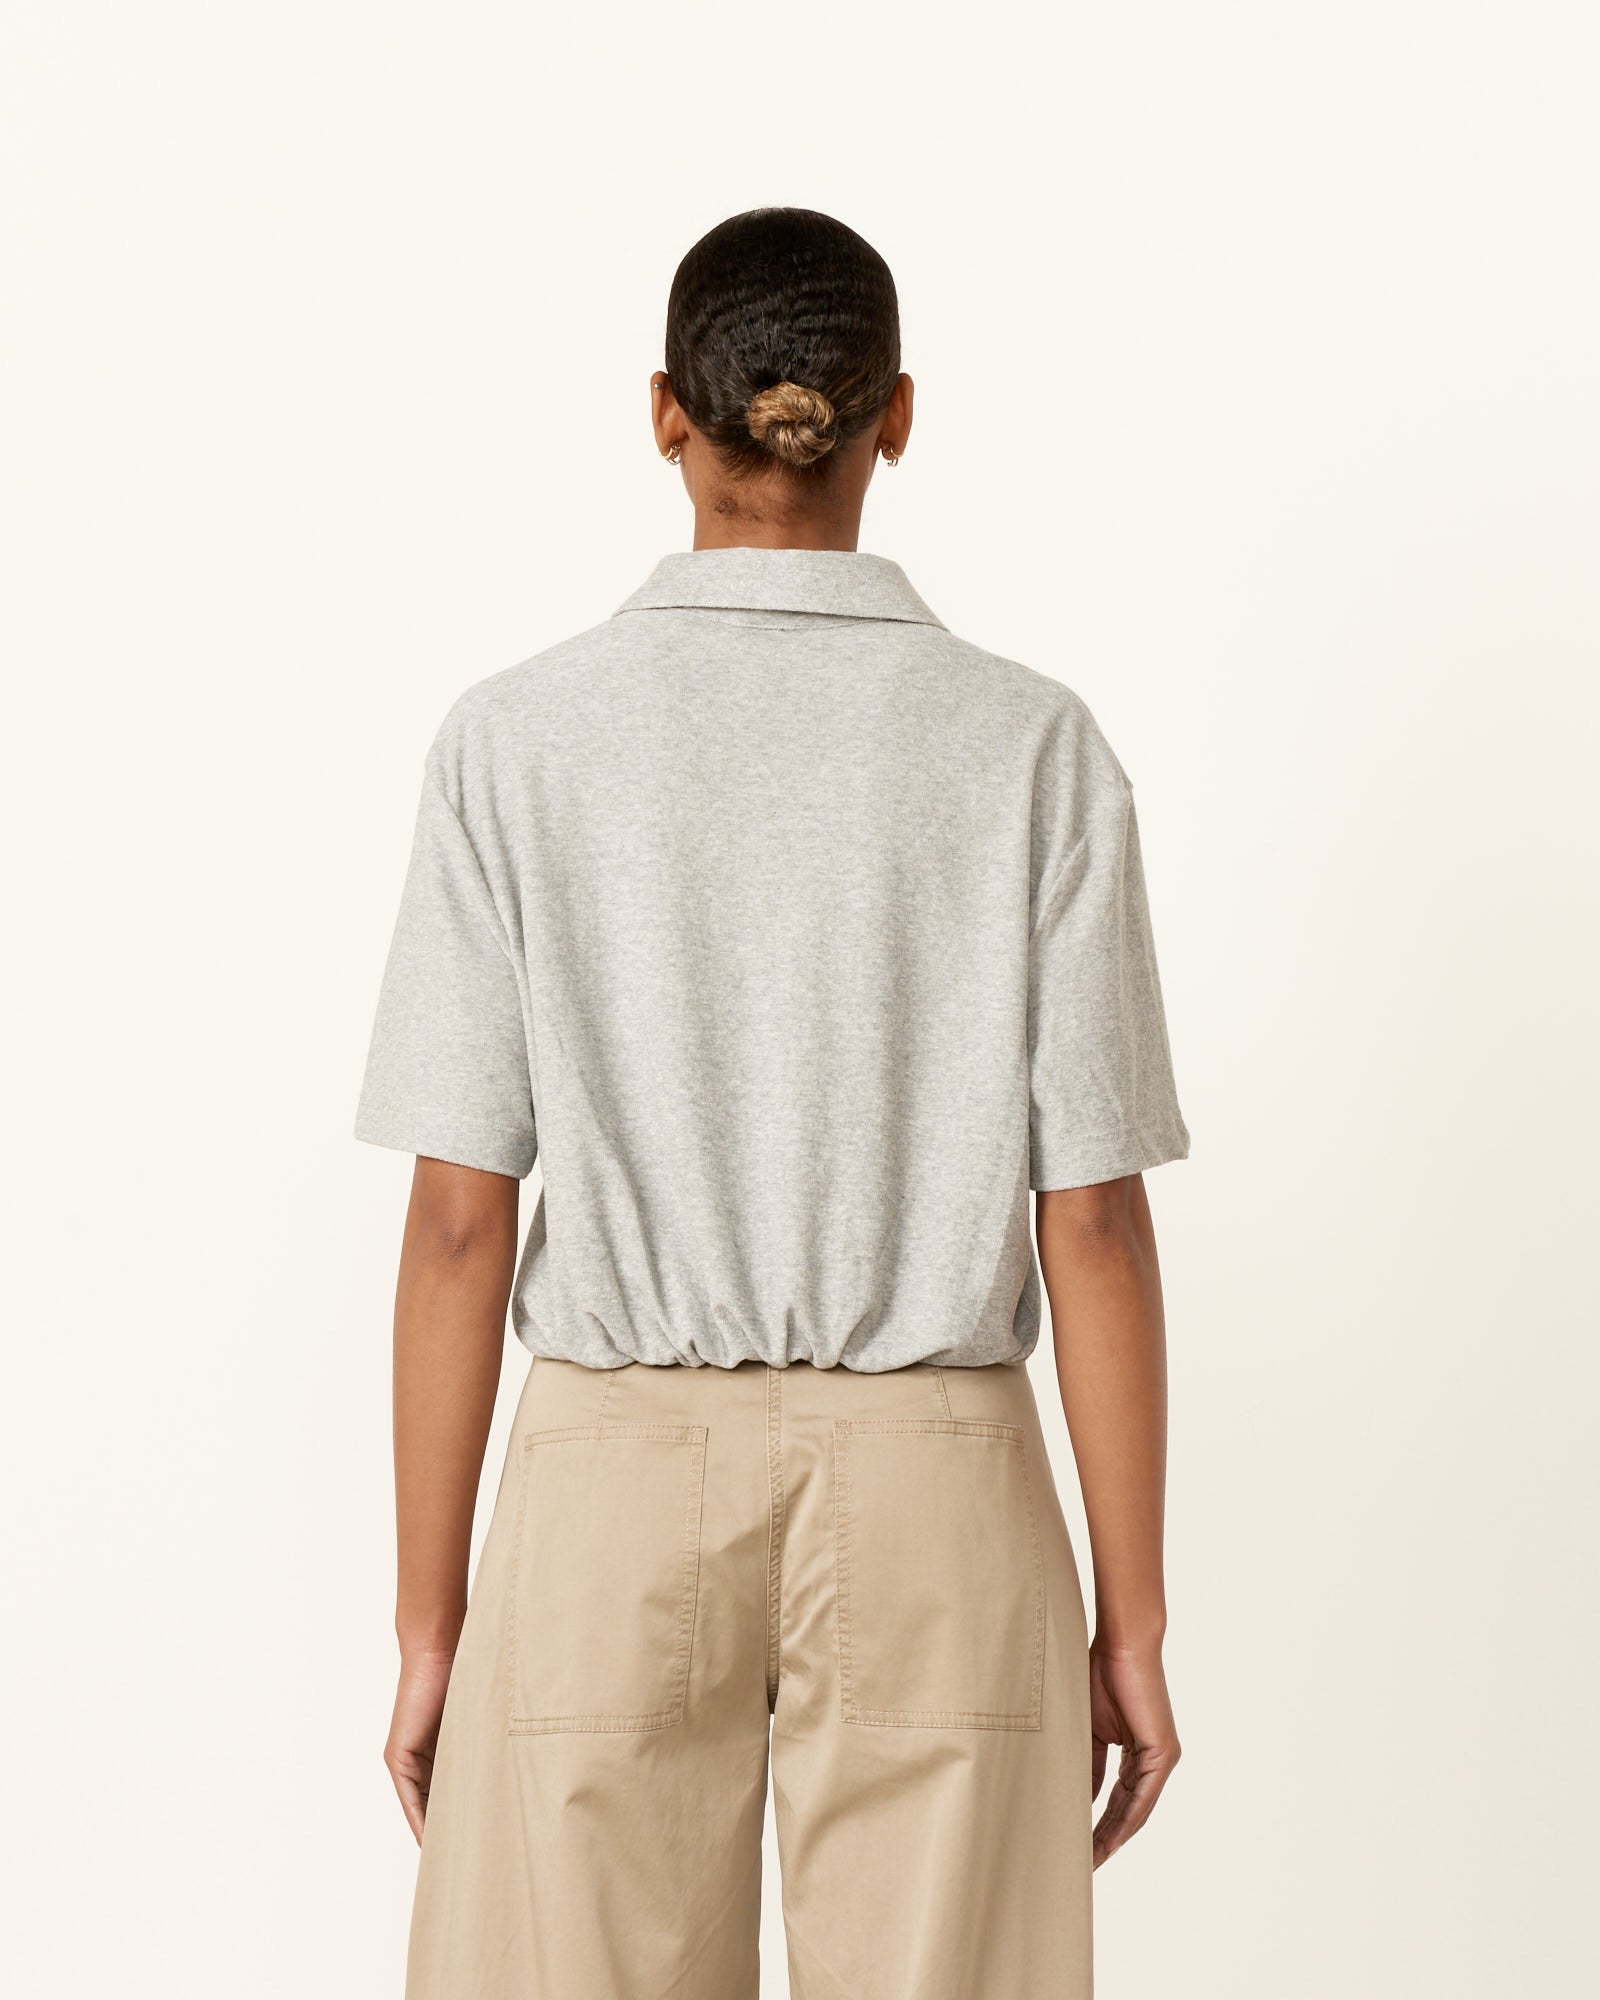 Terry Easy Polo Shirt in Heather Grey